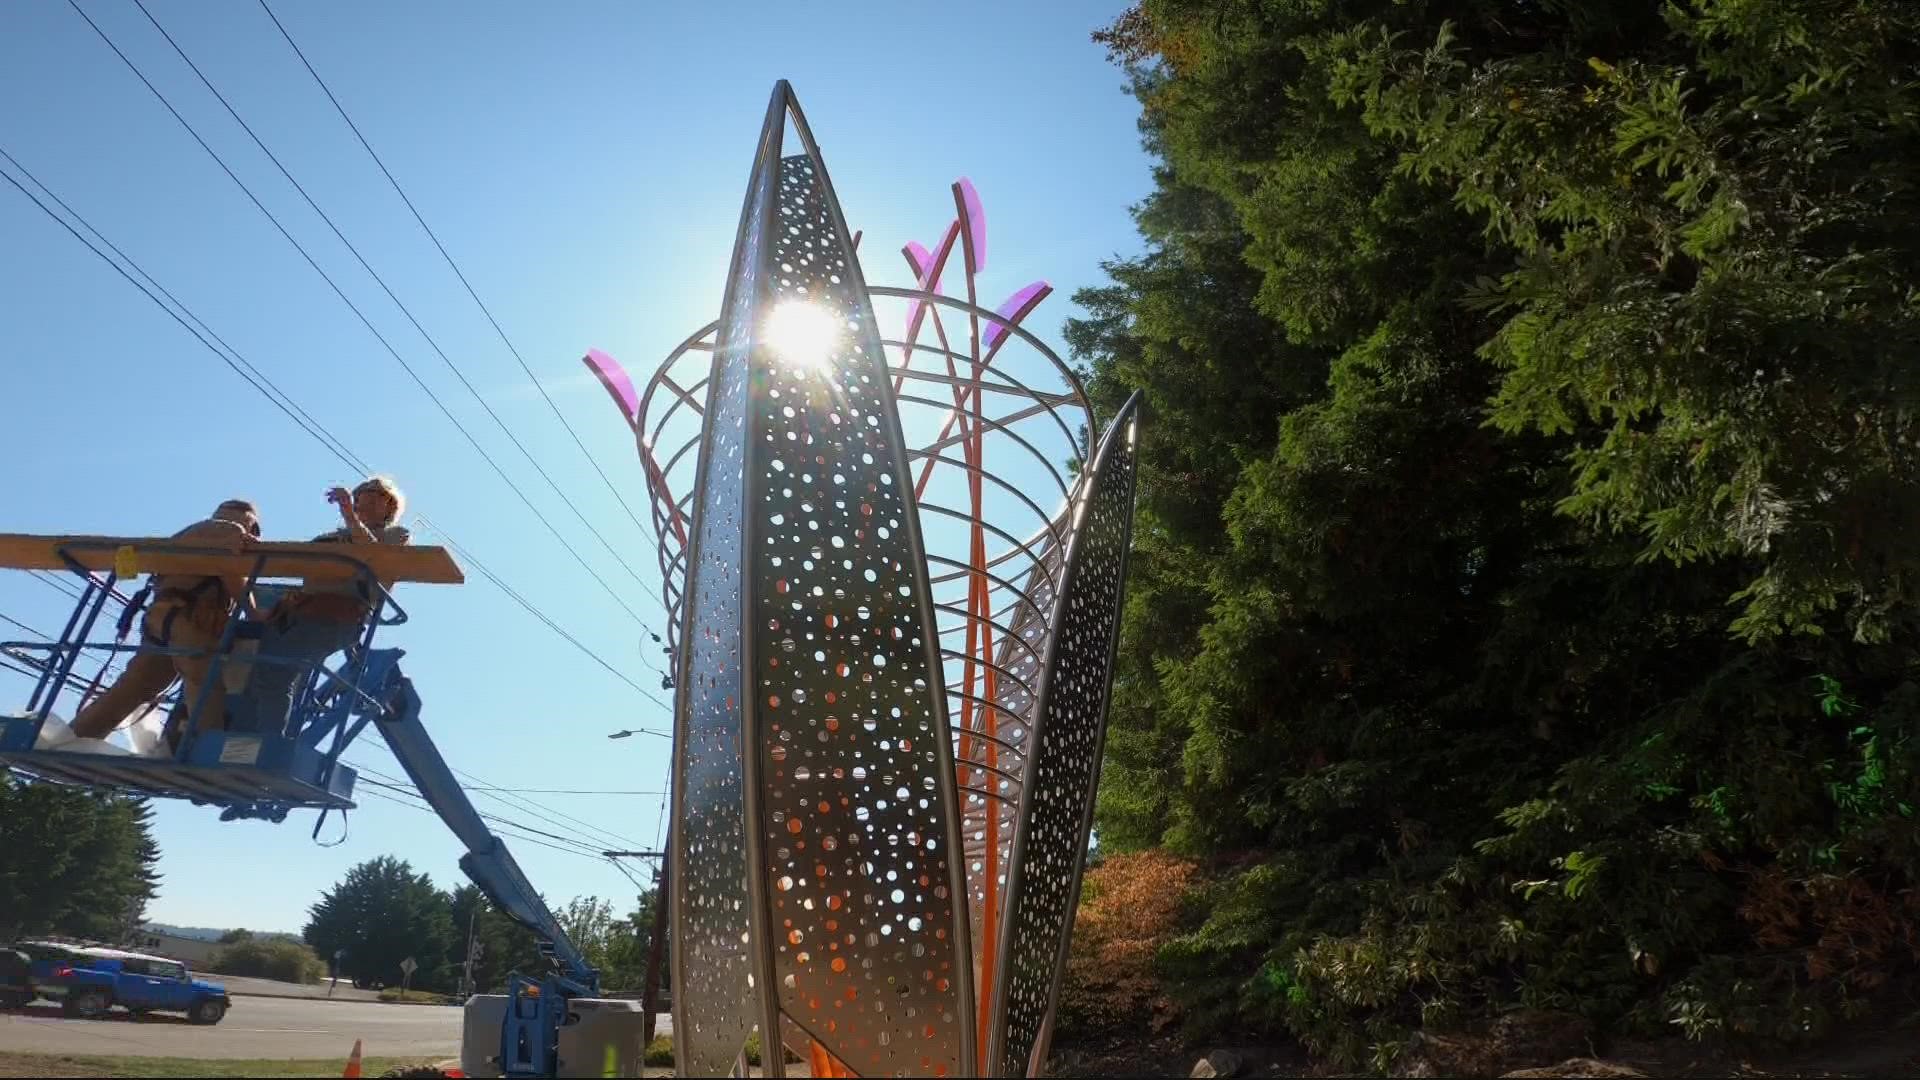 The sculpture is part of the city's 2016 public art master plan. Portland artist Ed Carpenter created the 5,000 pound piece.